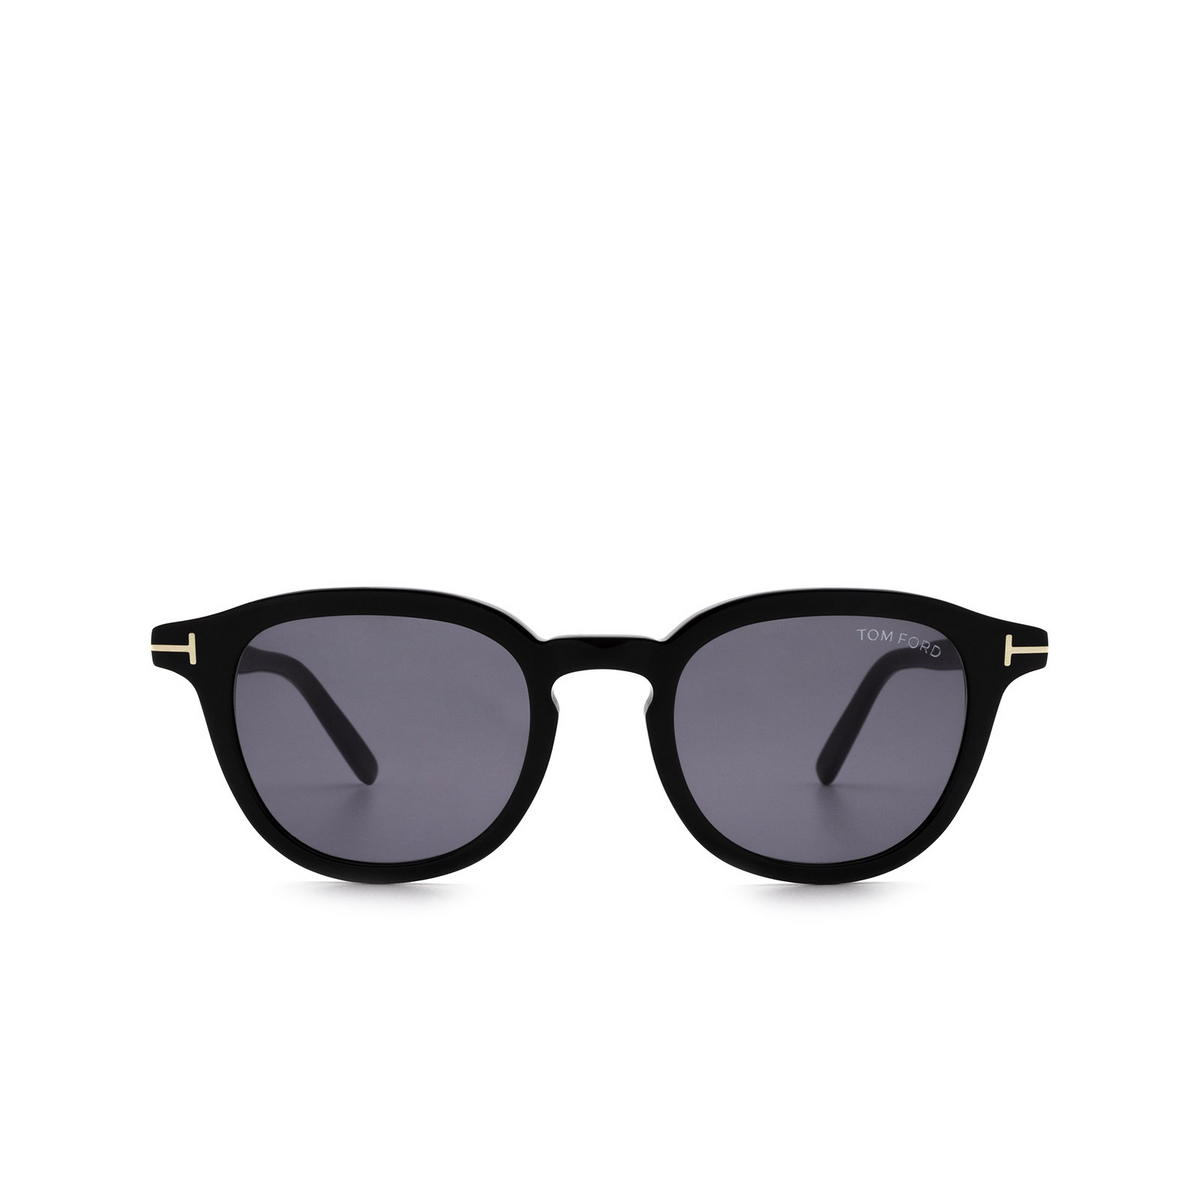 Tom Ford PAX Sunglasses 01A Shiny Black - front view